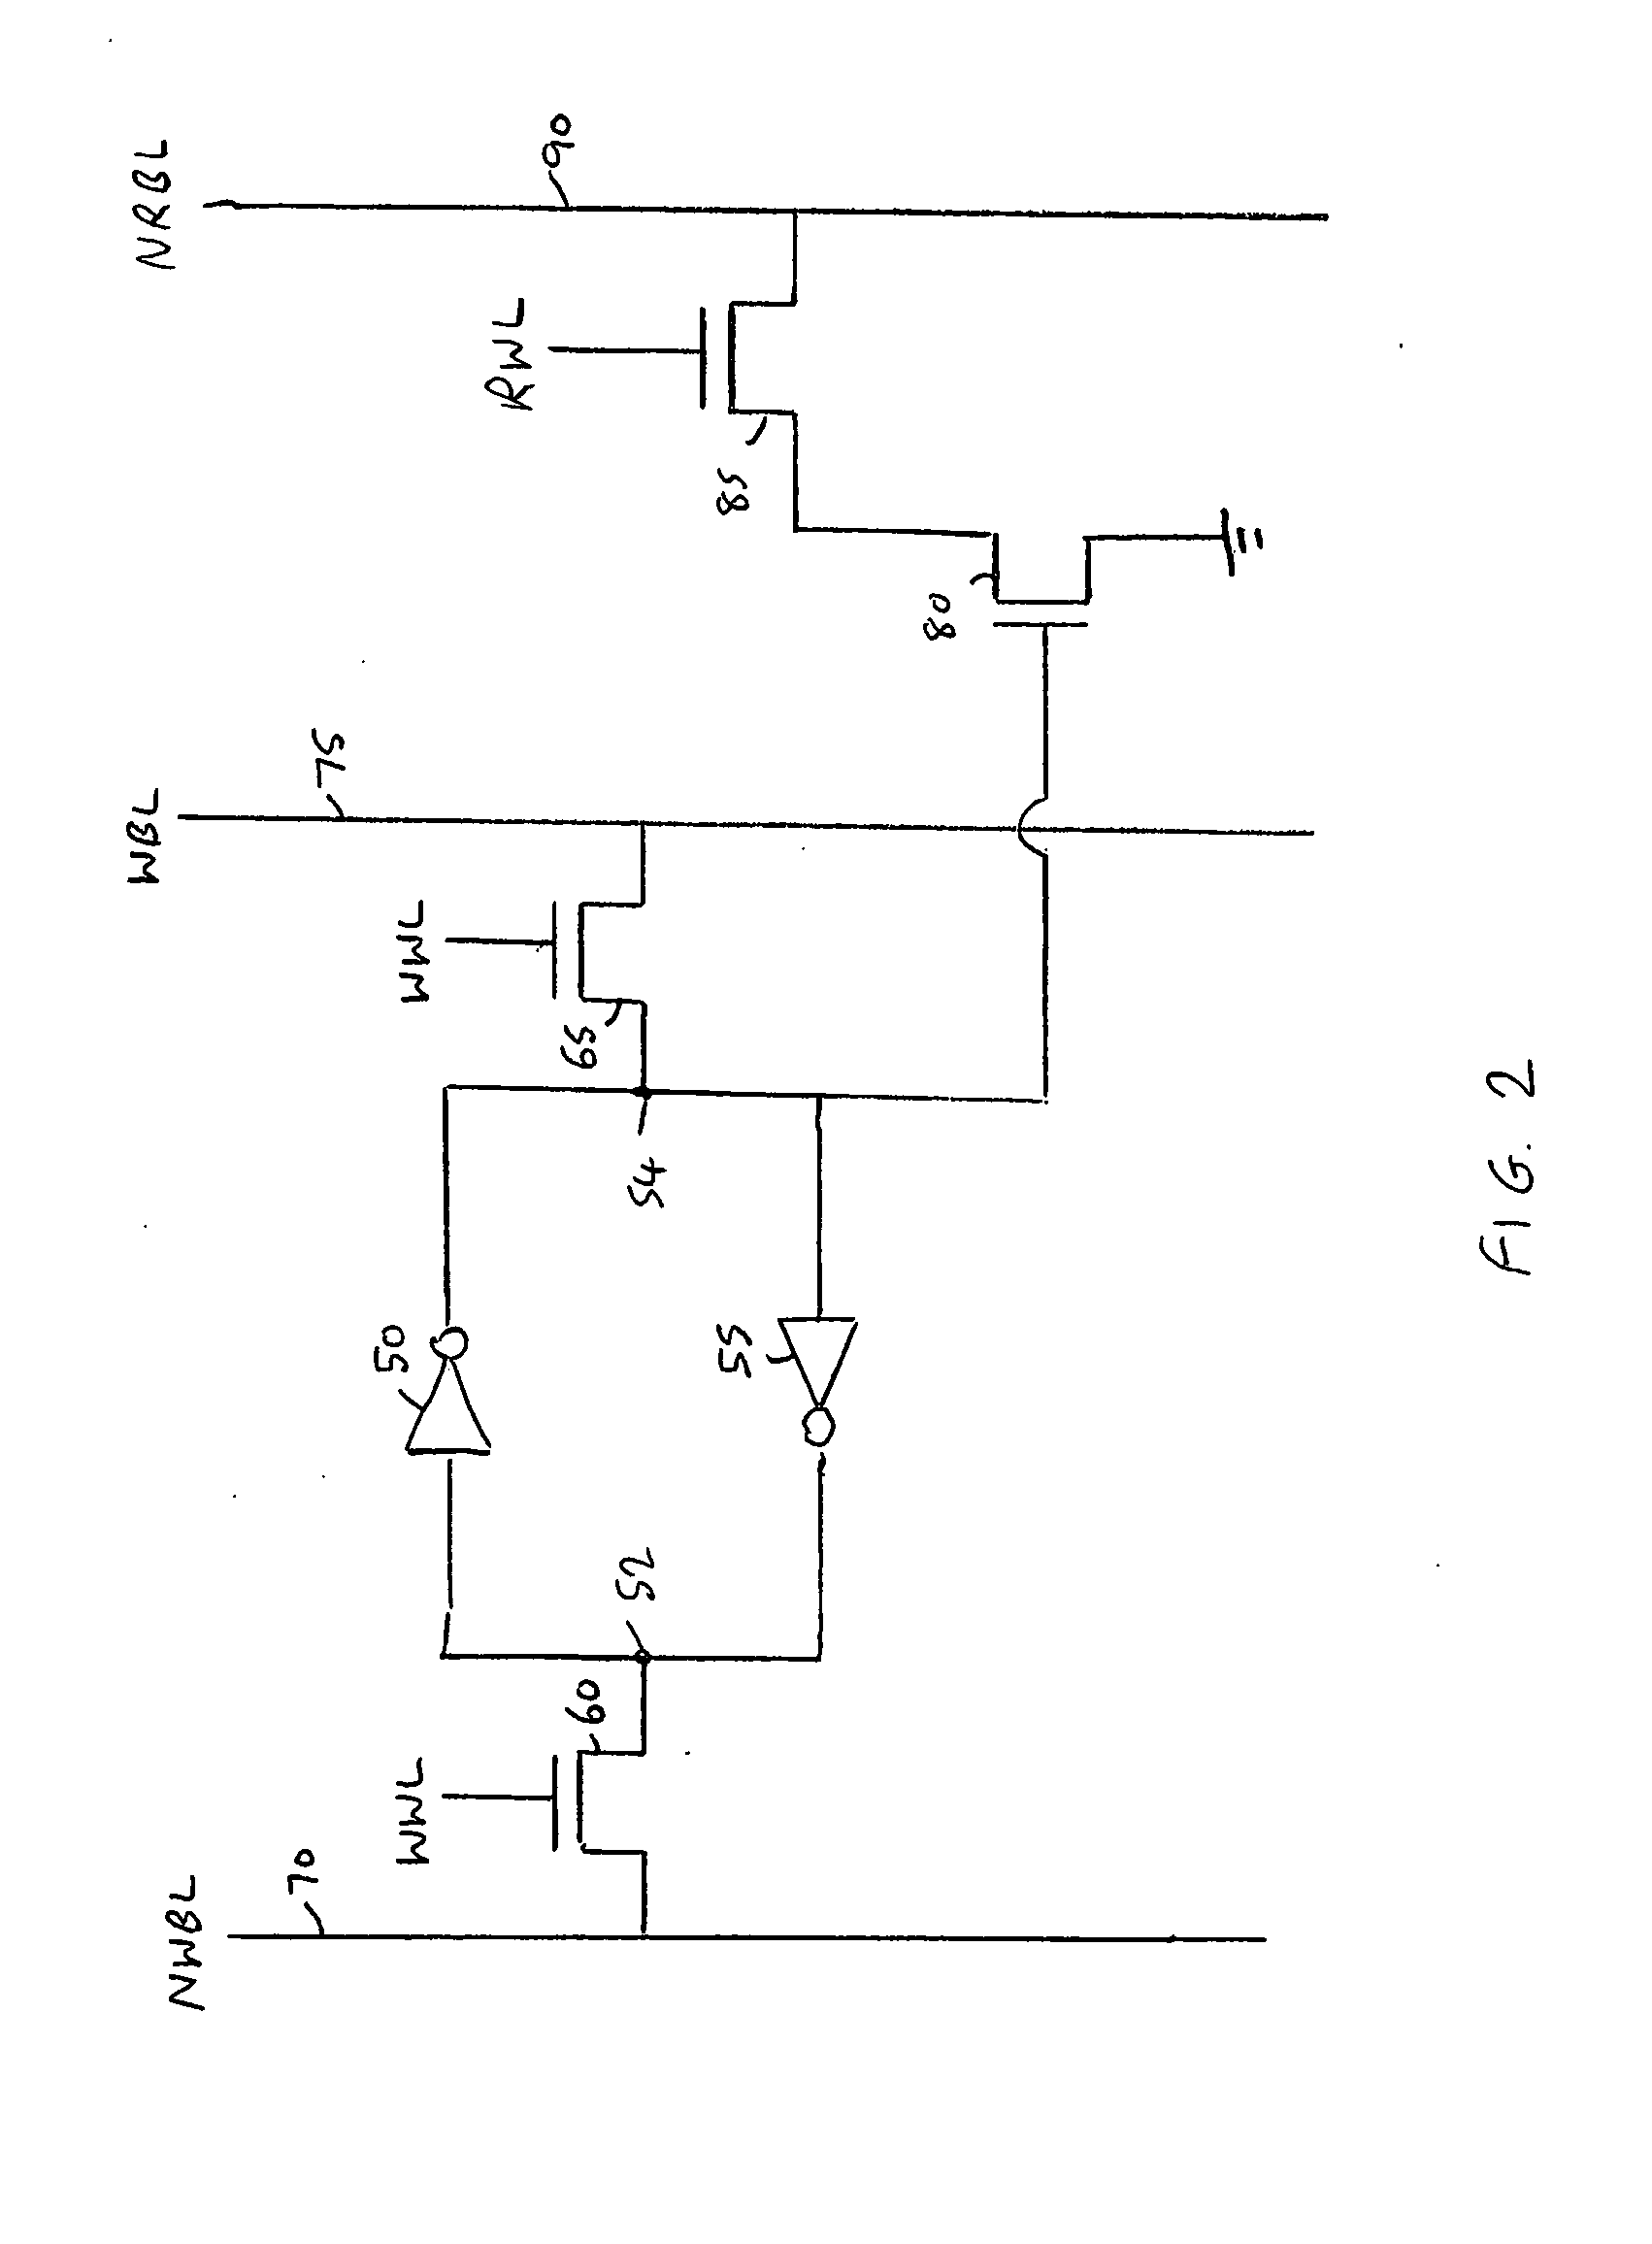 Memory device and method of controlling a write operation within a memory device